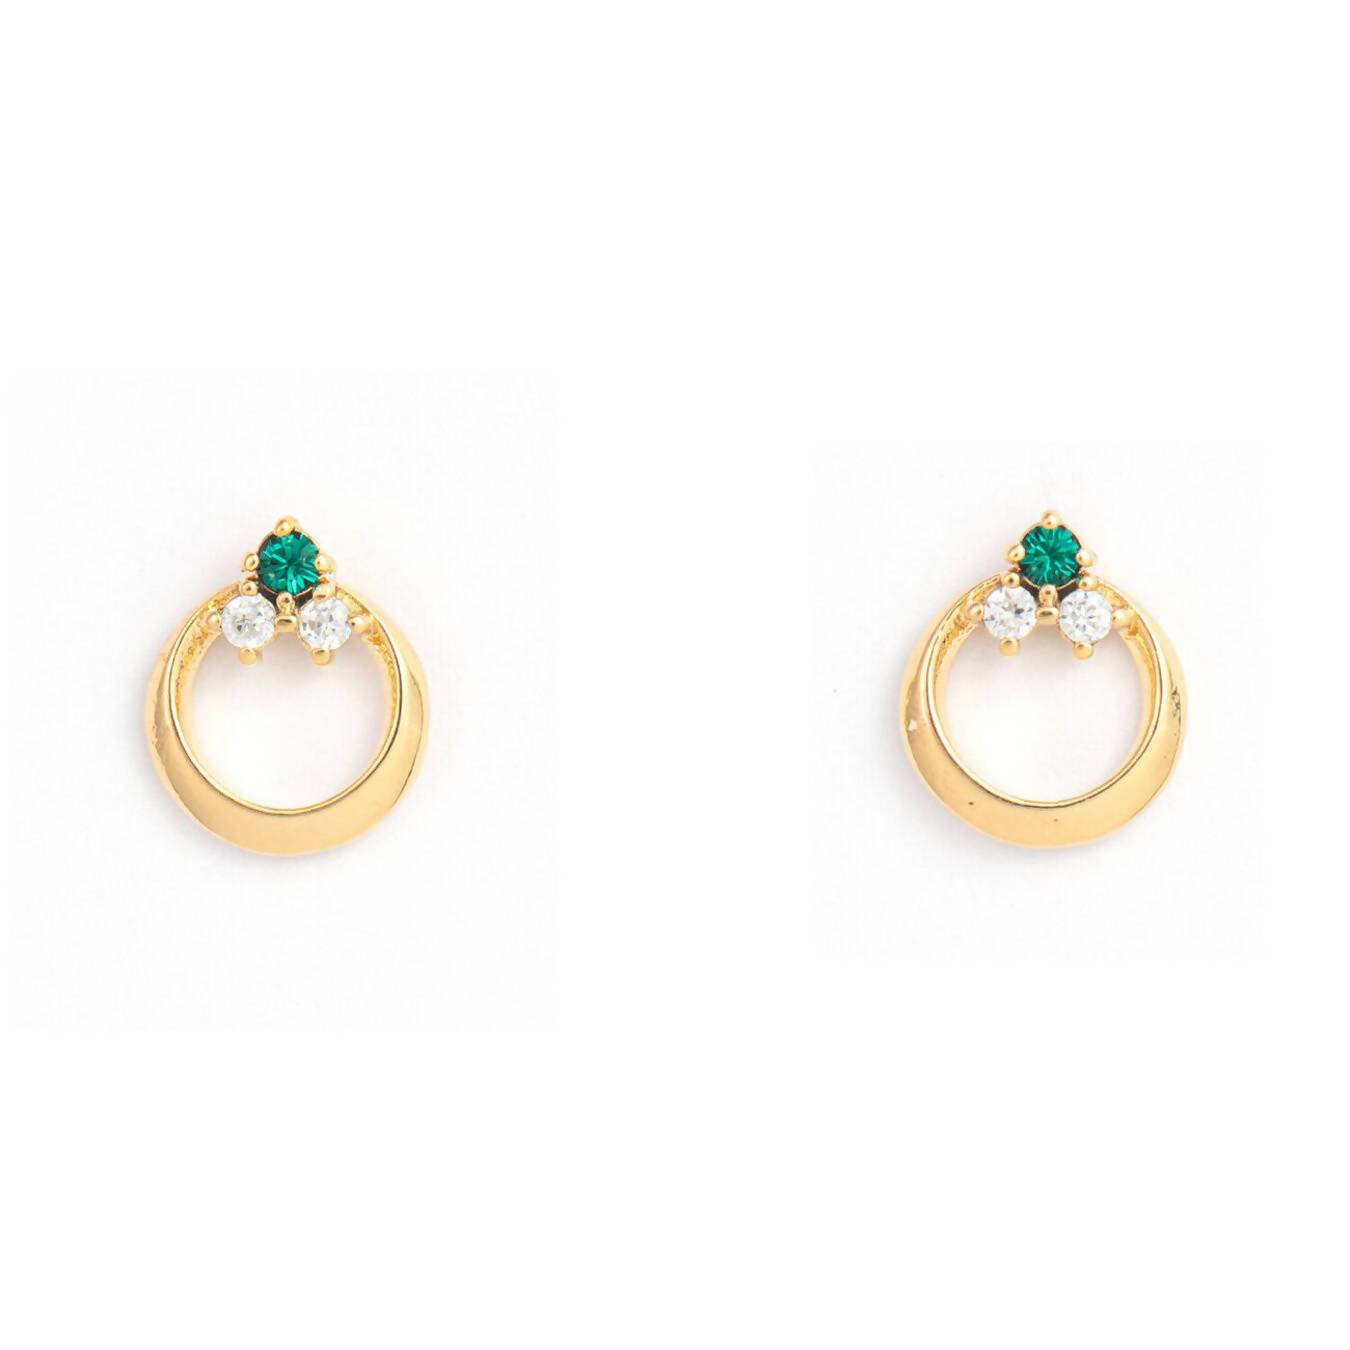 Astra- Dainty Earrings with Crystals made with Swarovski Elements Earring Studs Forest Jewelry Emerald 